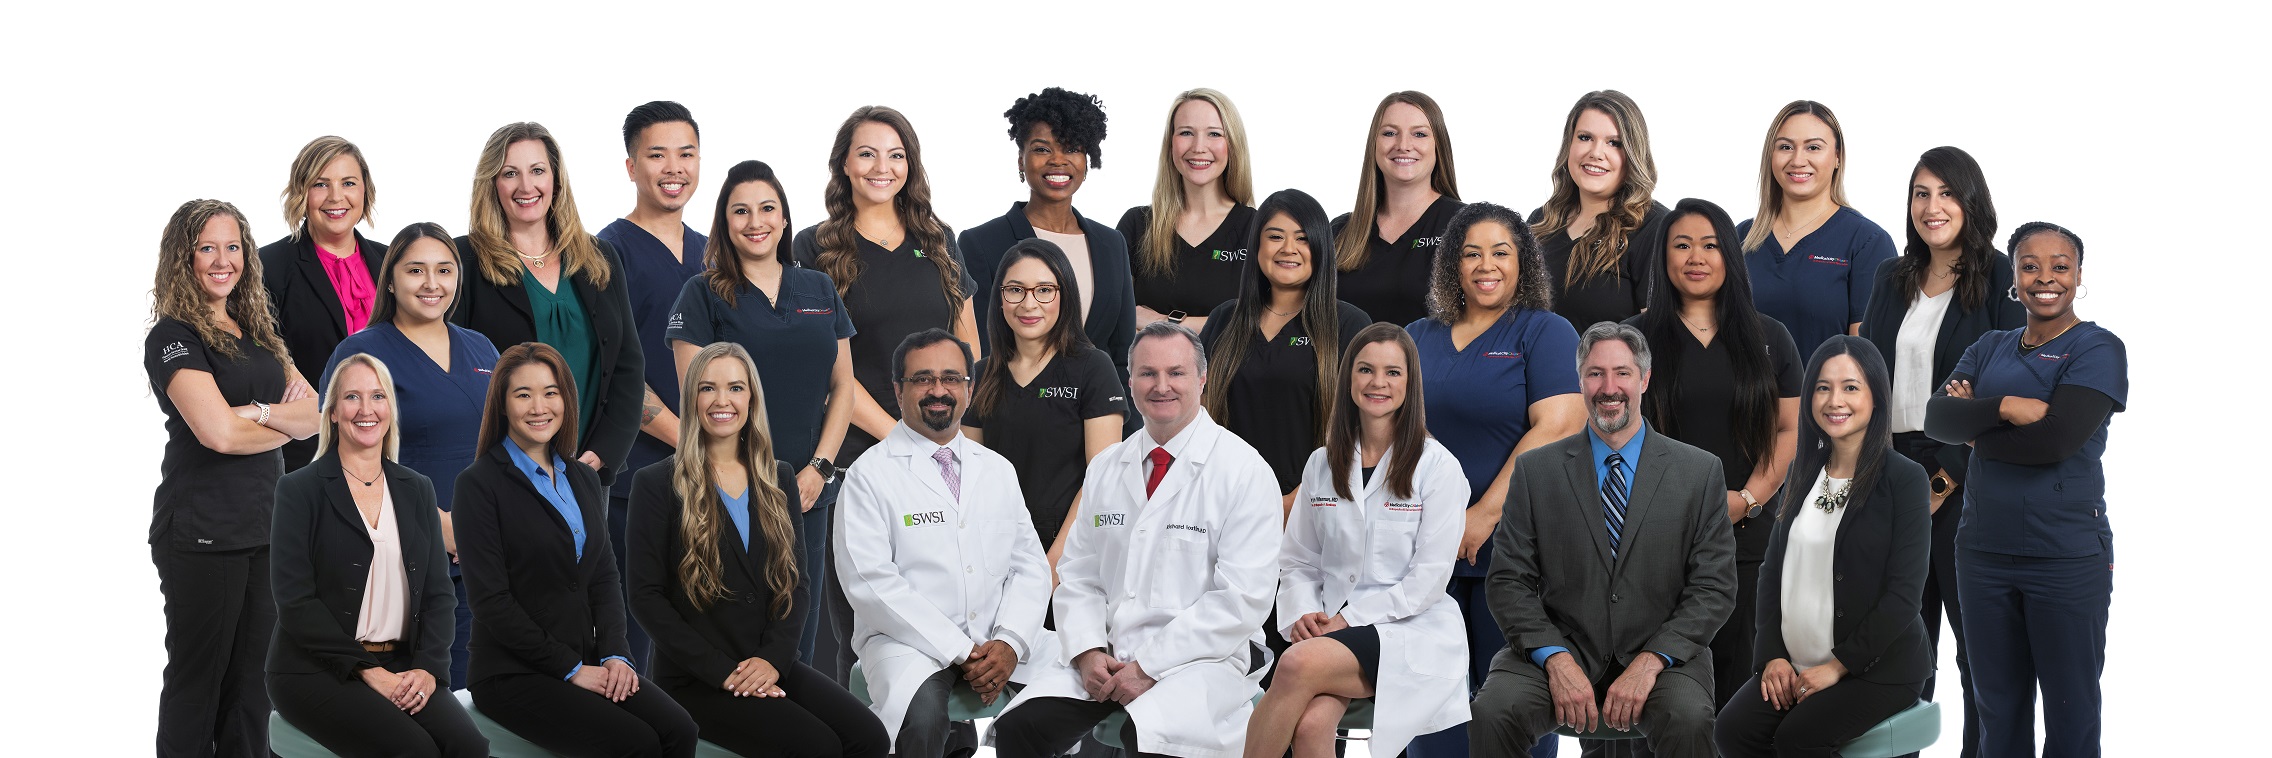 Southwest Scoliosis and Spine Institute Team Picture